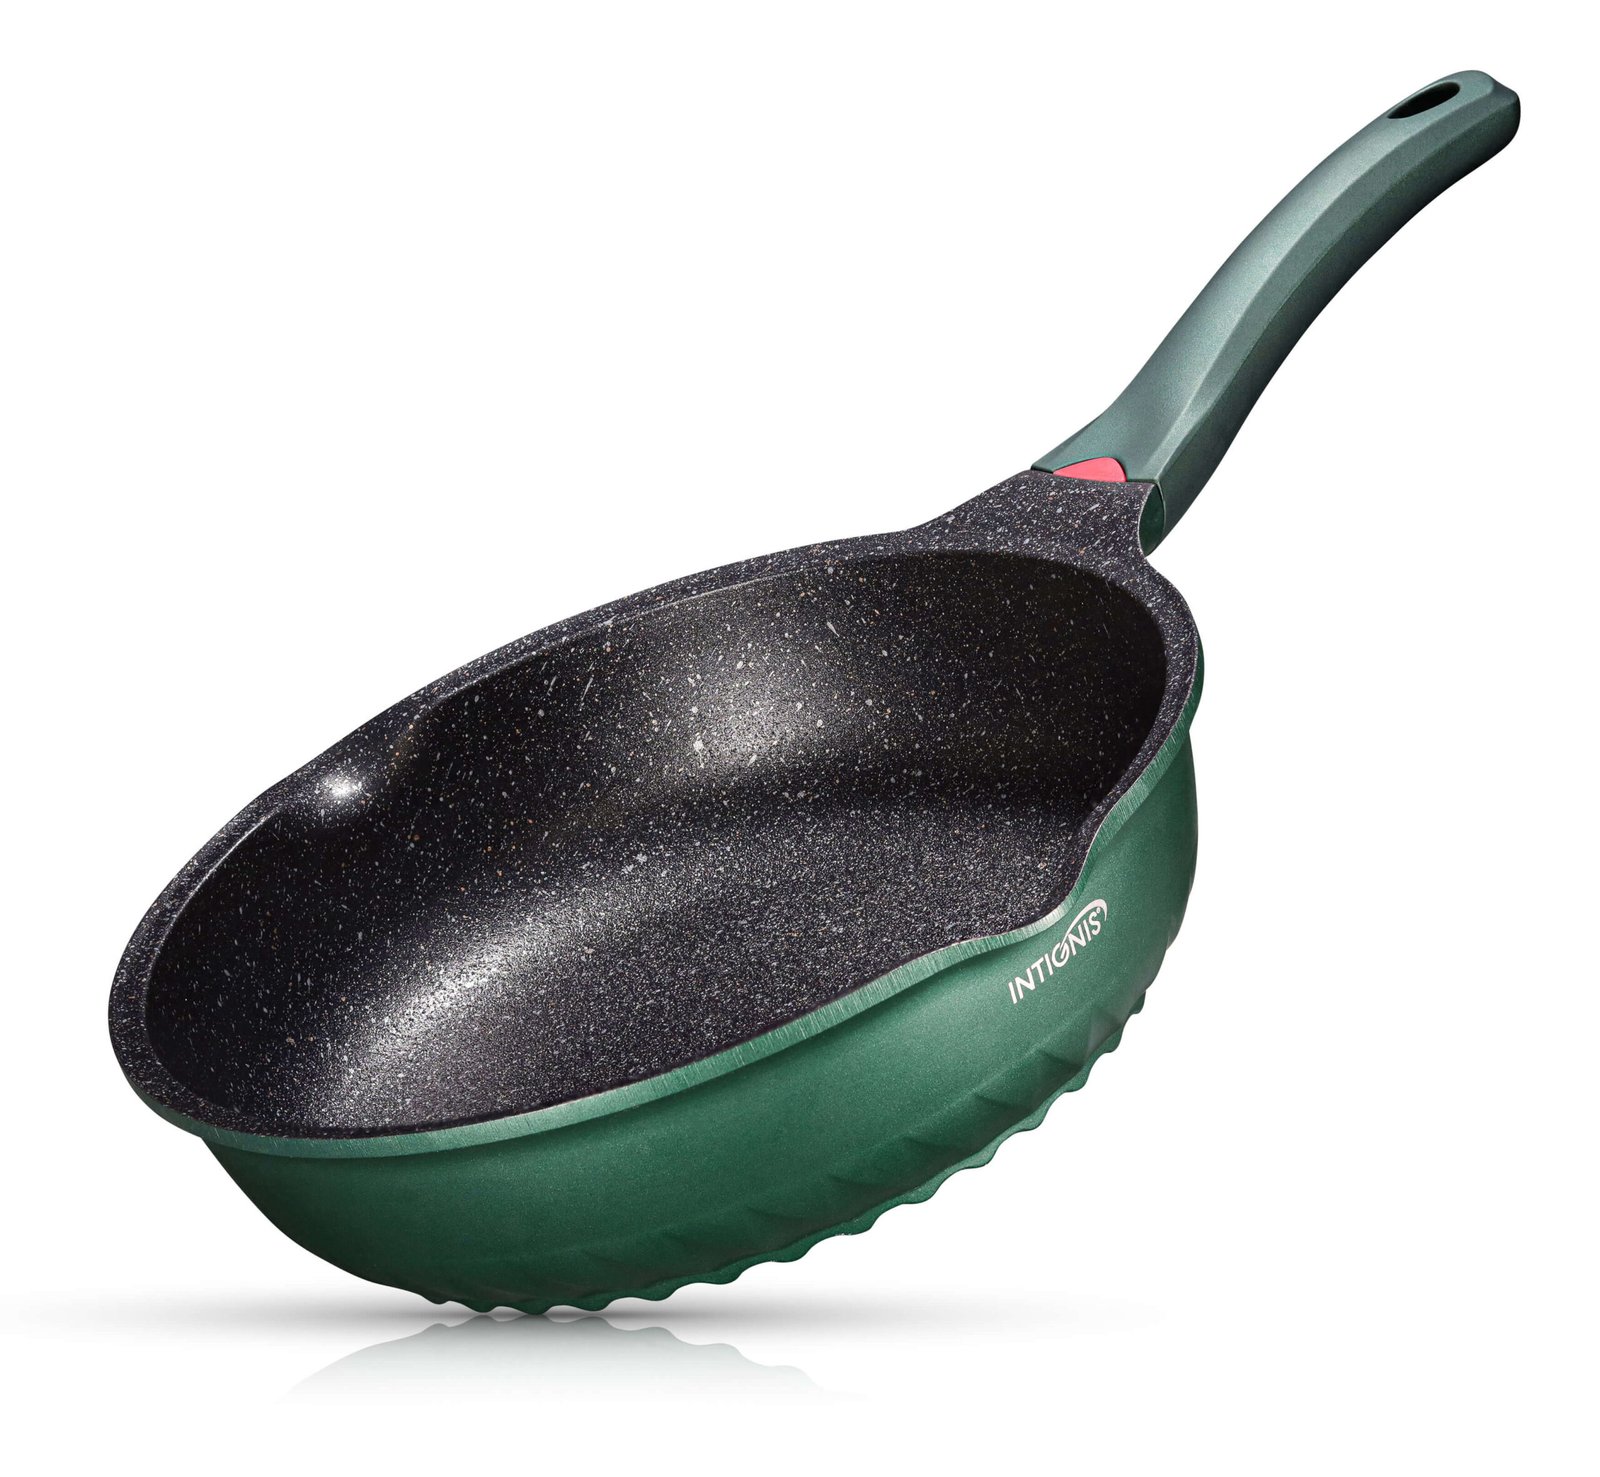 Frying Pan with Lid 28cm – Anti Scratch induction - Classics With